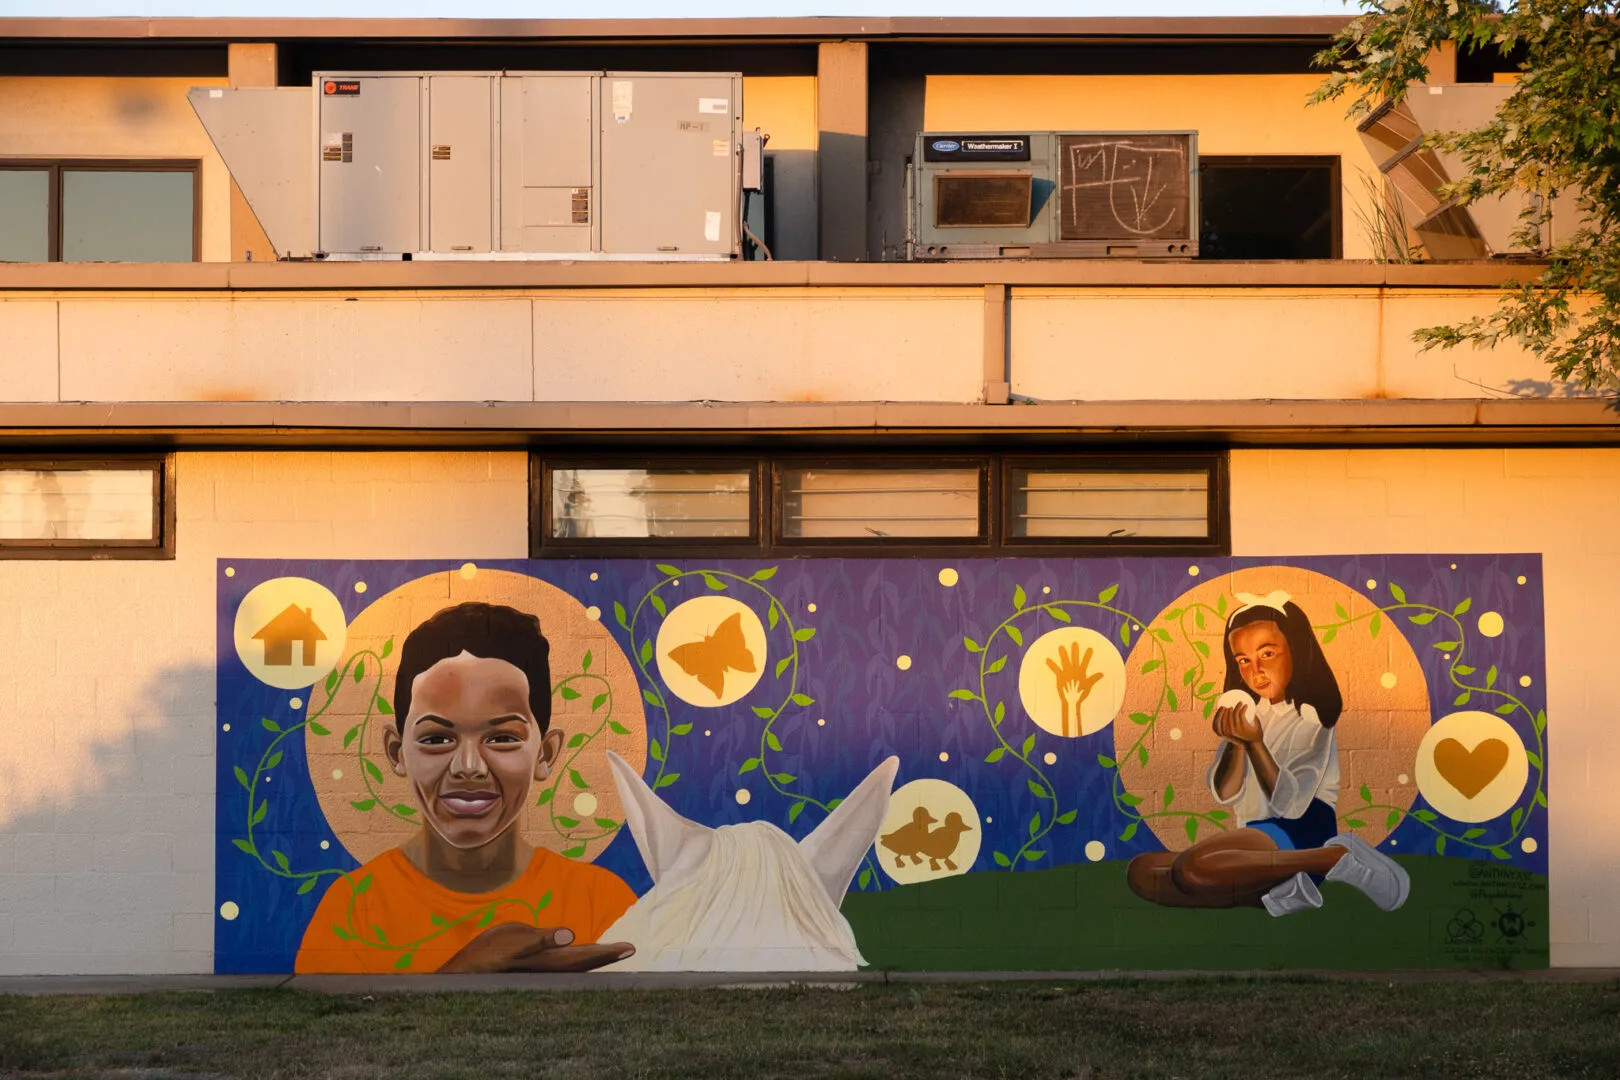 A mural depicting a young boy playing with a horse and a young girl holding a ball of light. There are drawings of a house, a butterfly, a hand, and a heart. An air conditioning unit sits above.